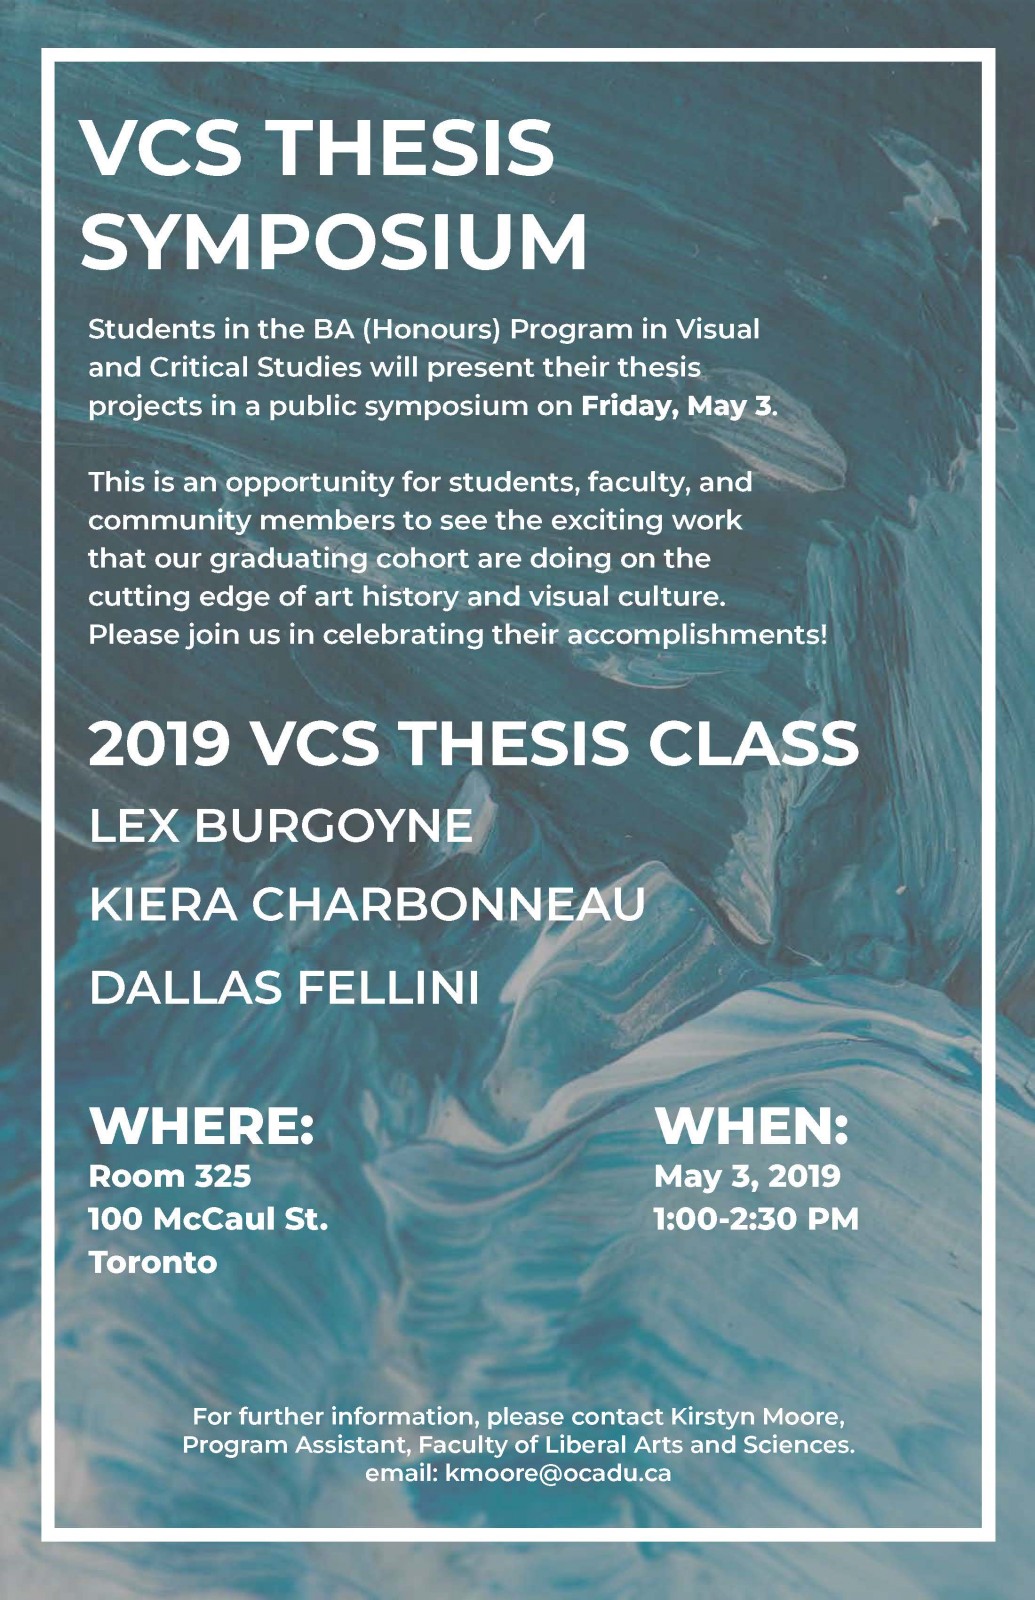 White text "VCS Symposium 2019" on abstractly painted teal and blue background.